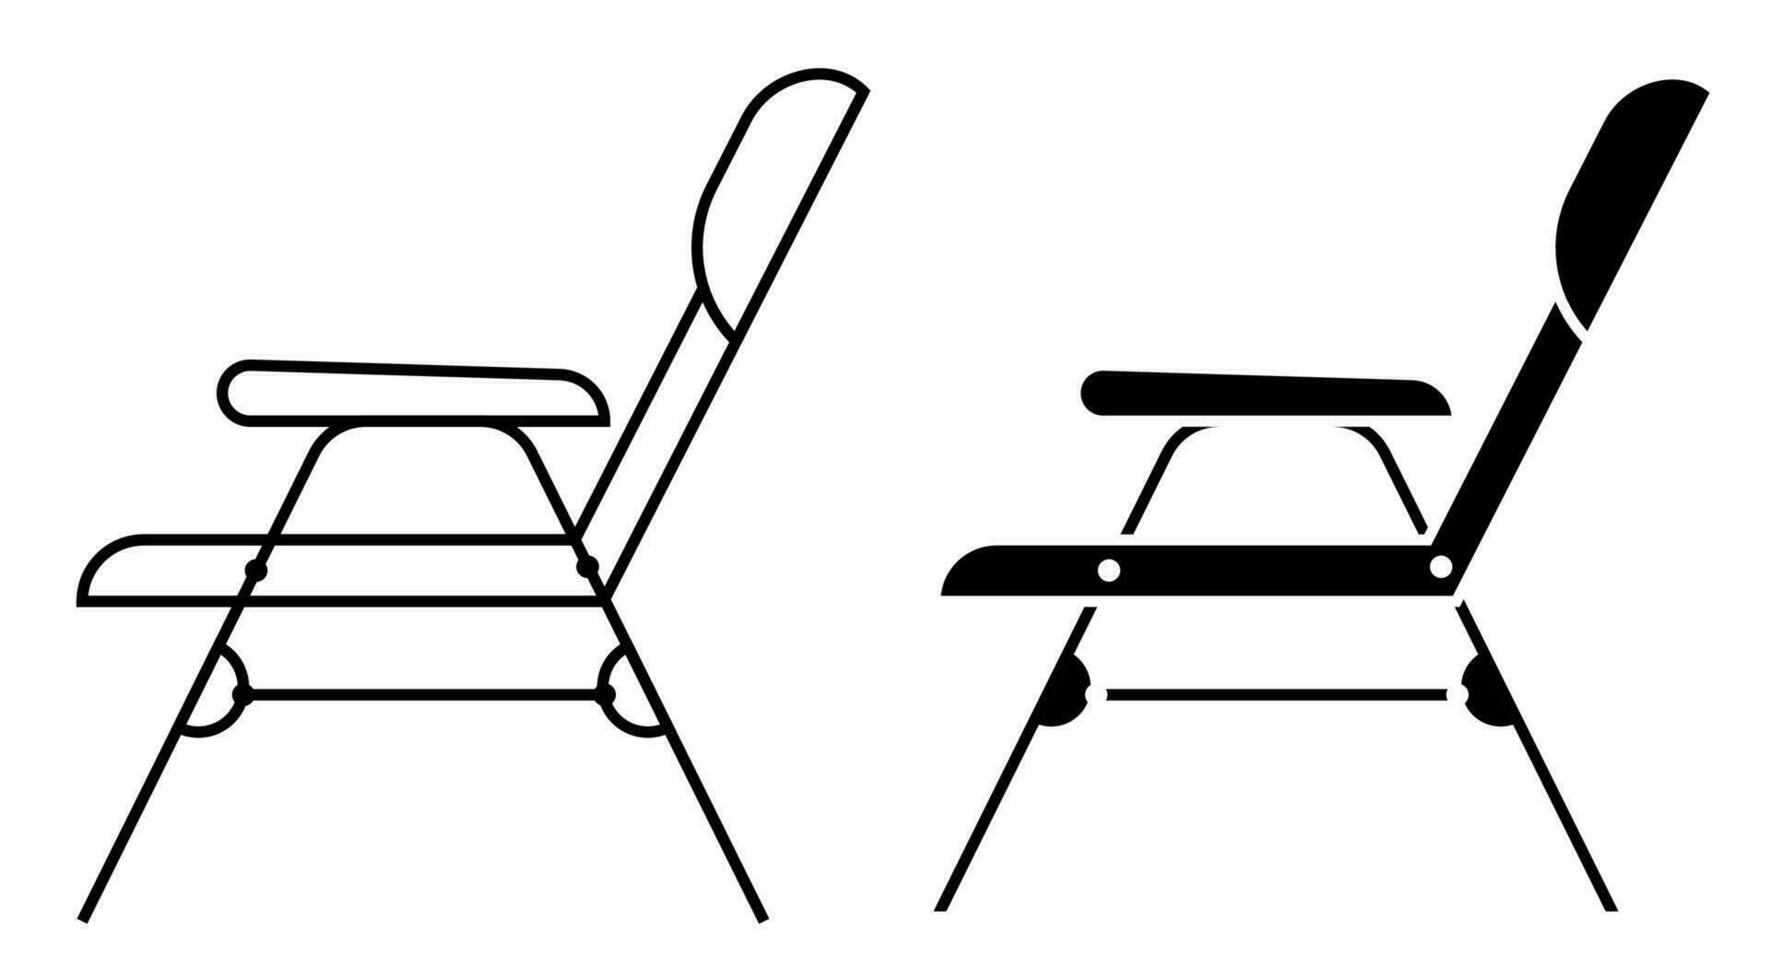 summer lounger icon. Lounge chair on beach. Sunbathing by sea. Simple black and white vector